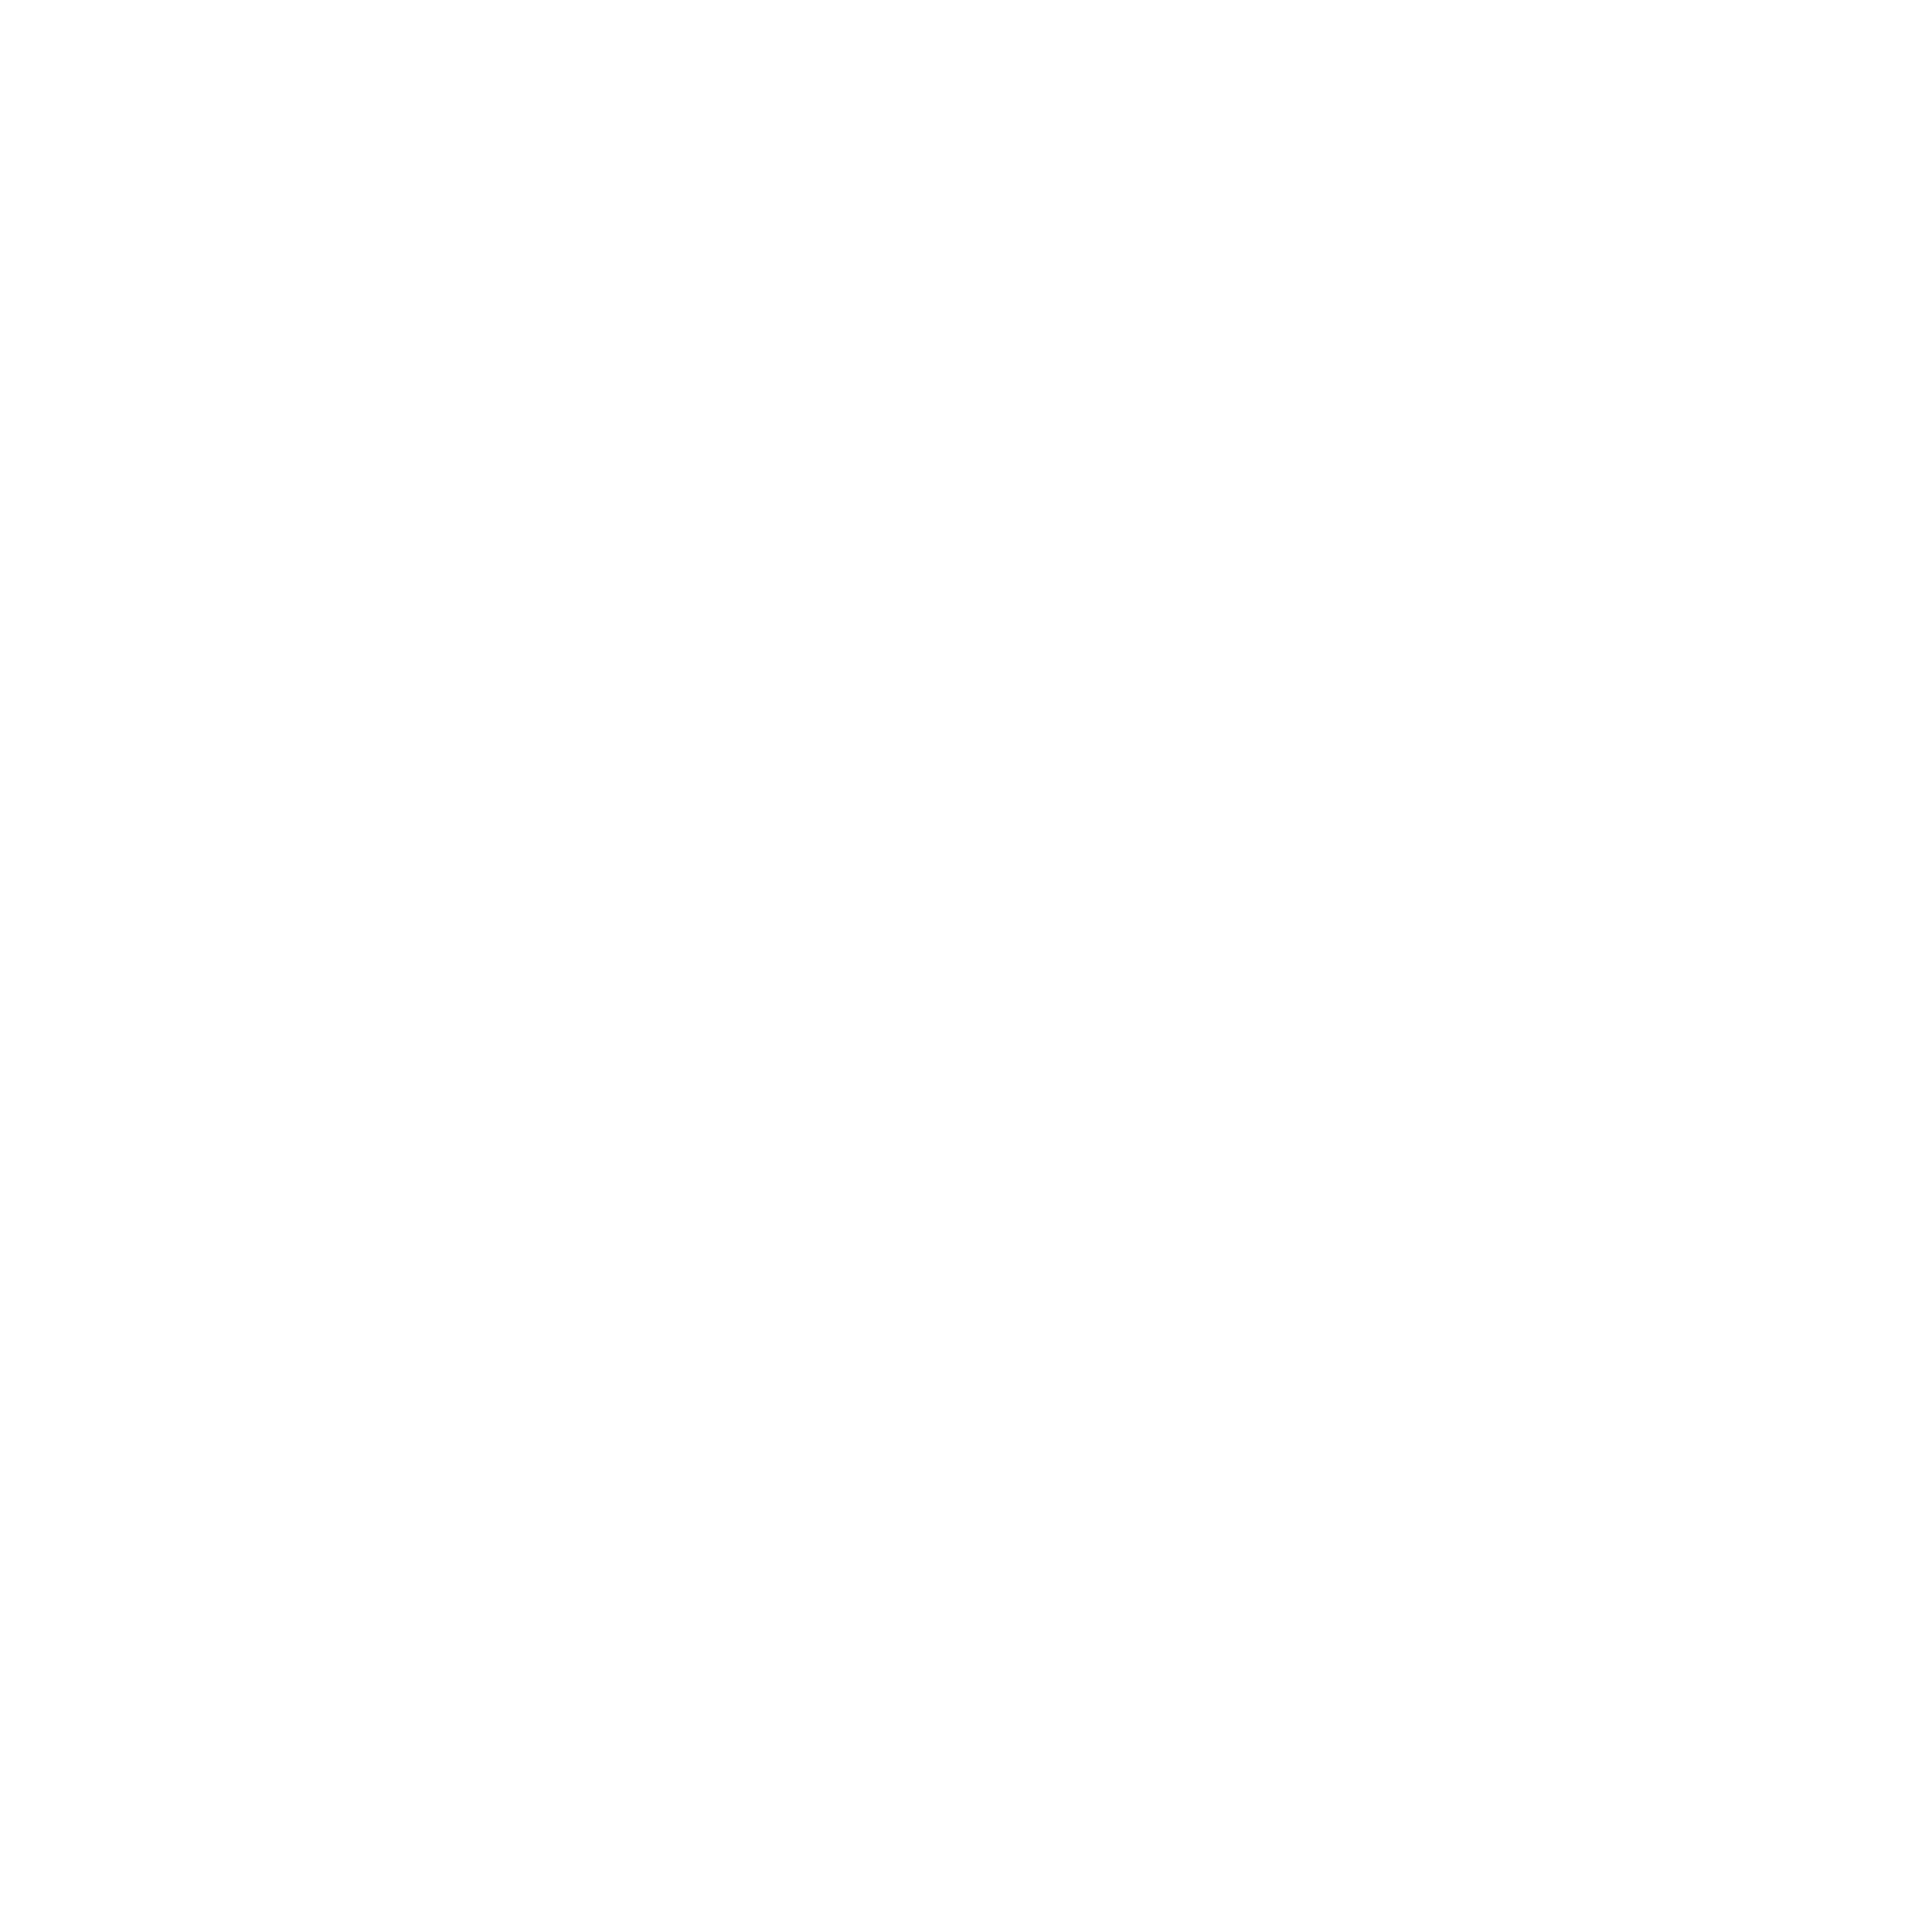 SushionSecondlogo@4x.png